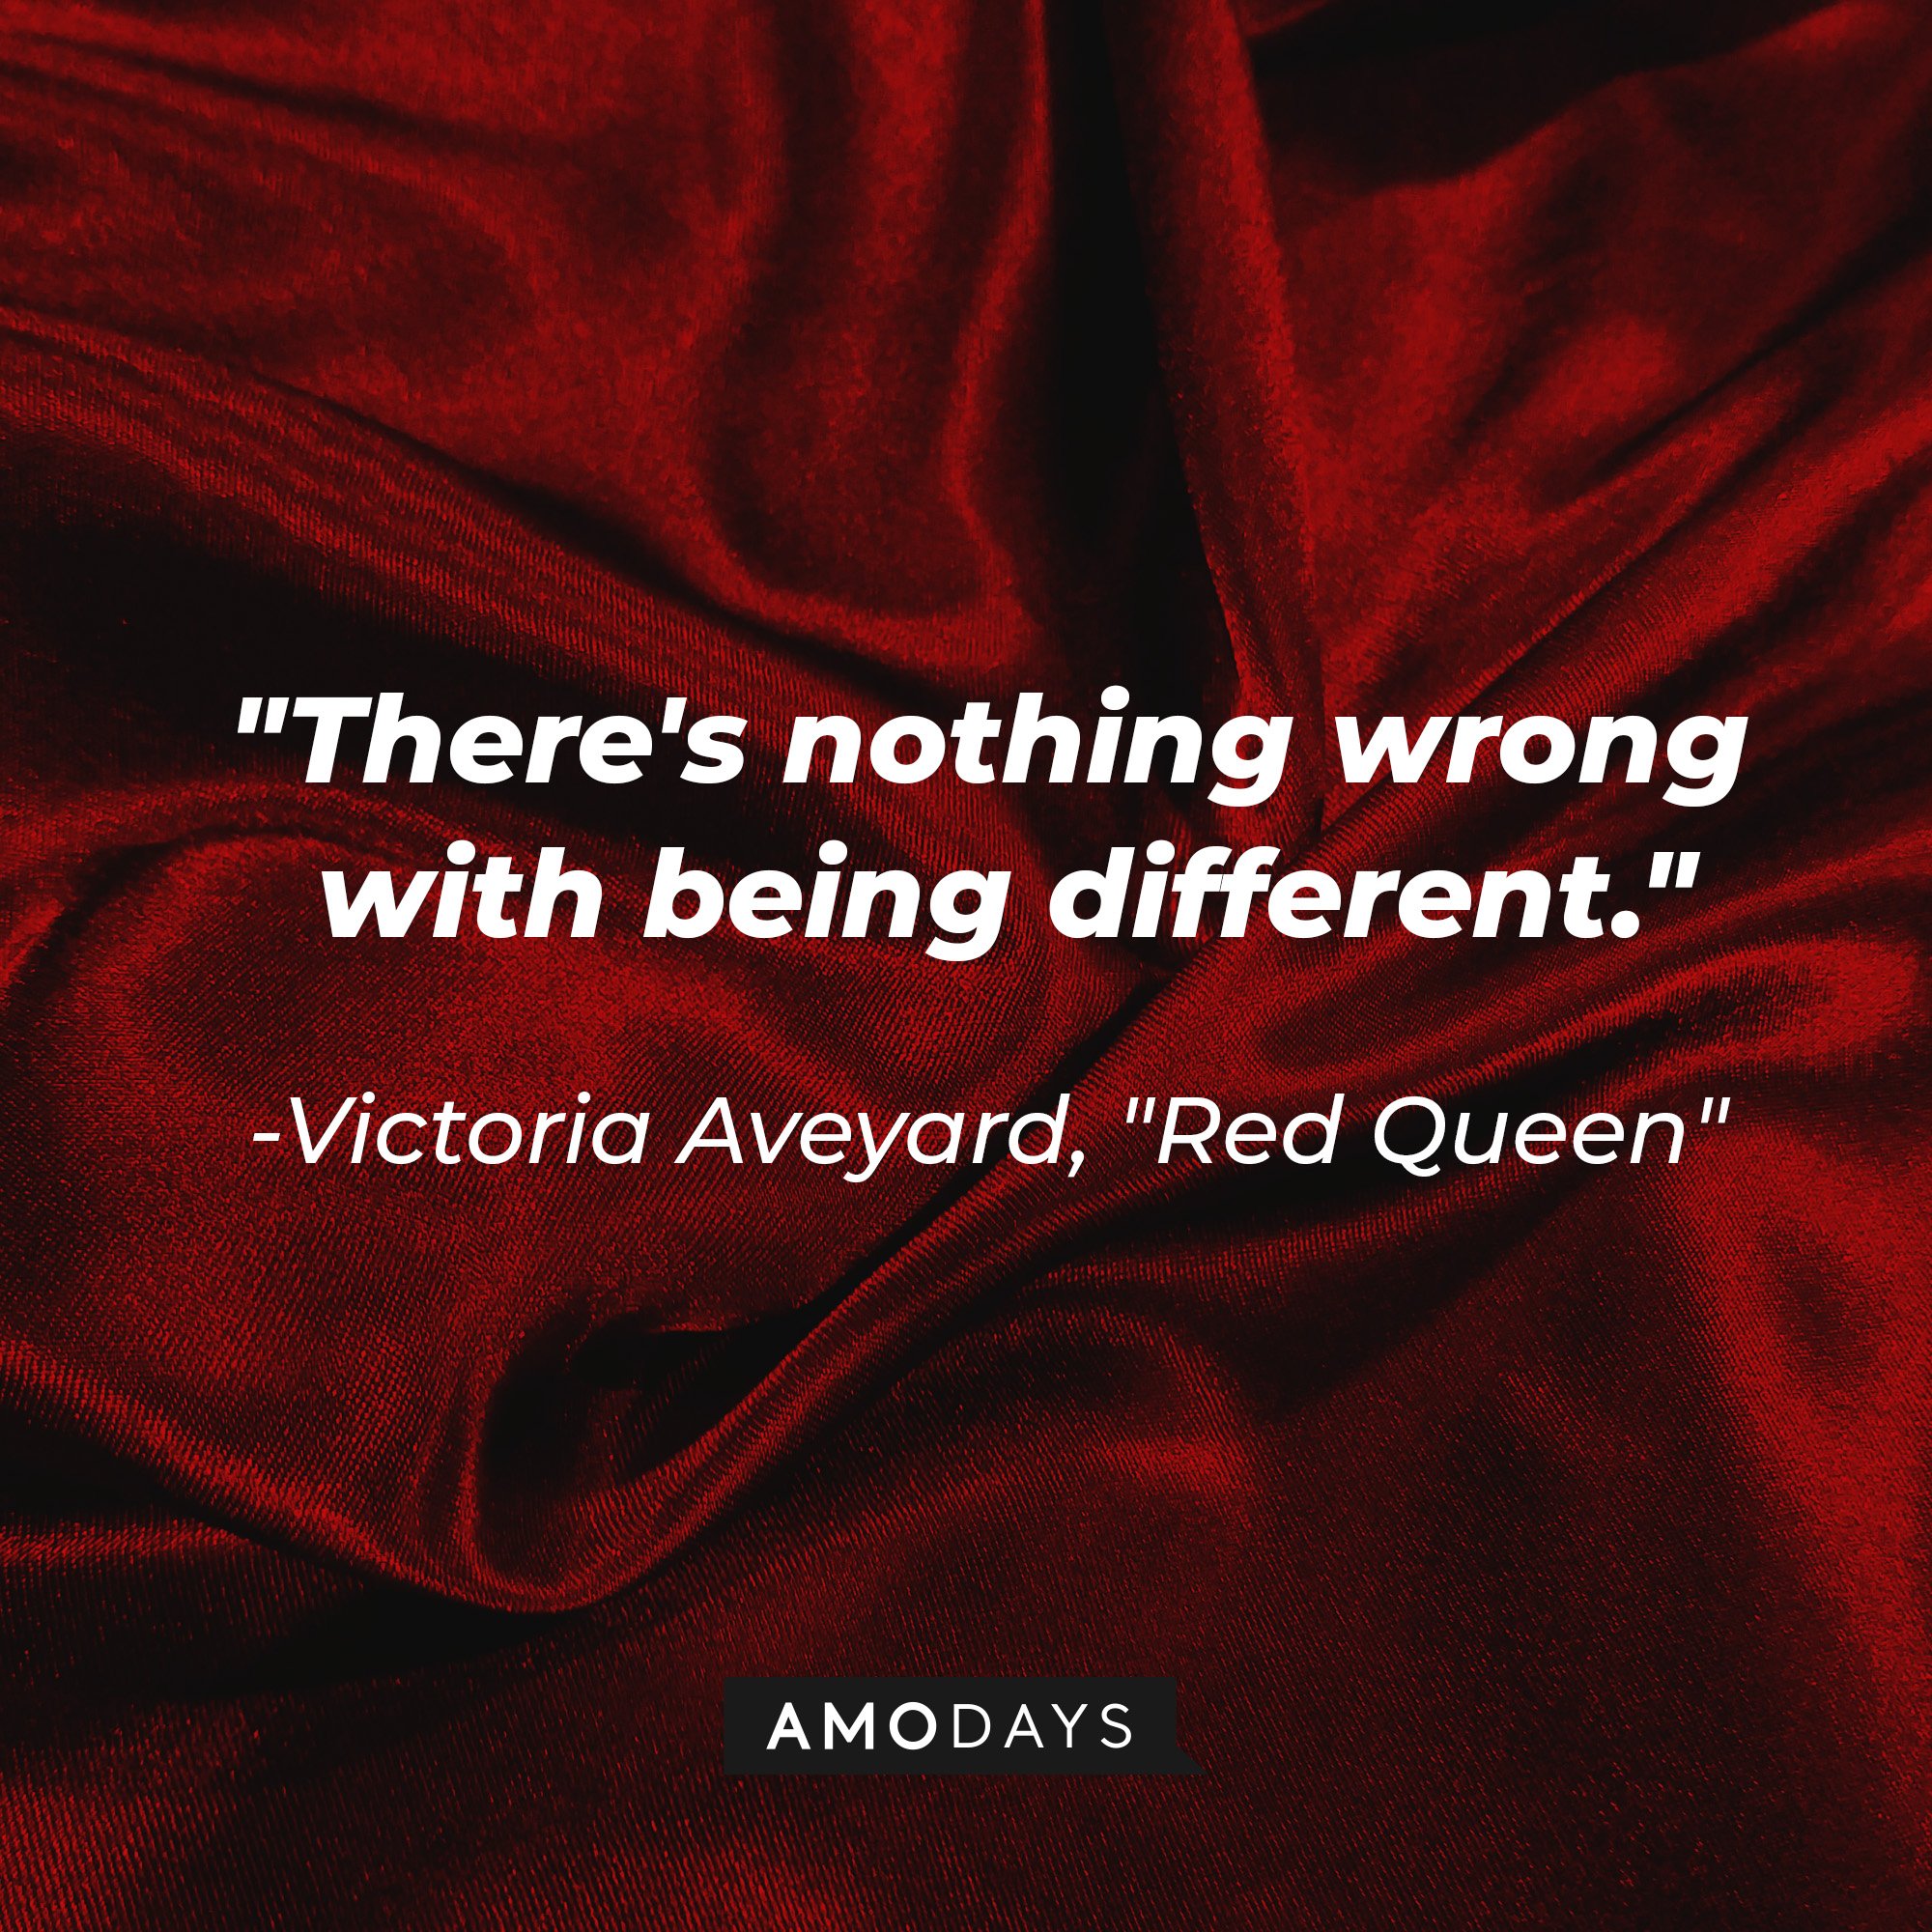 Victoria Aveyard’s quote in “Red Queen”:  "There's nothing wrong with being different." | Image: AmoDays